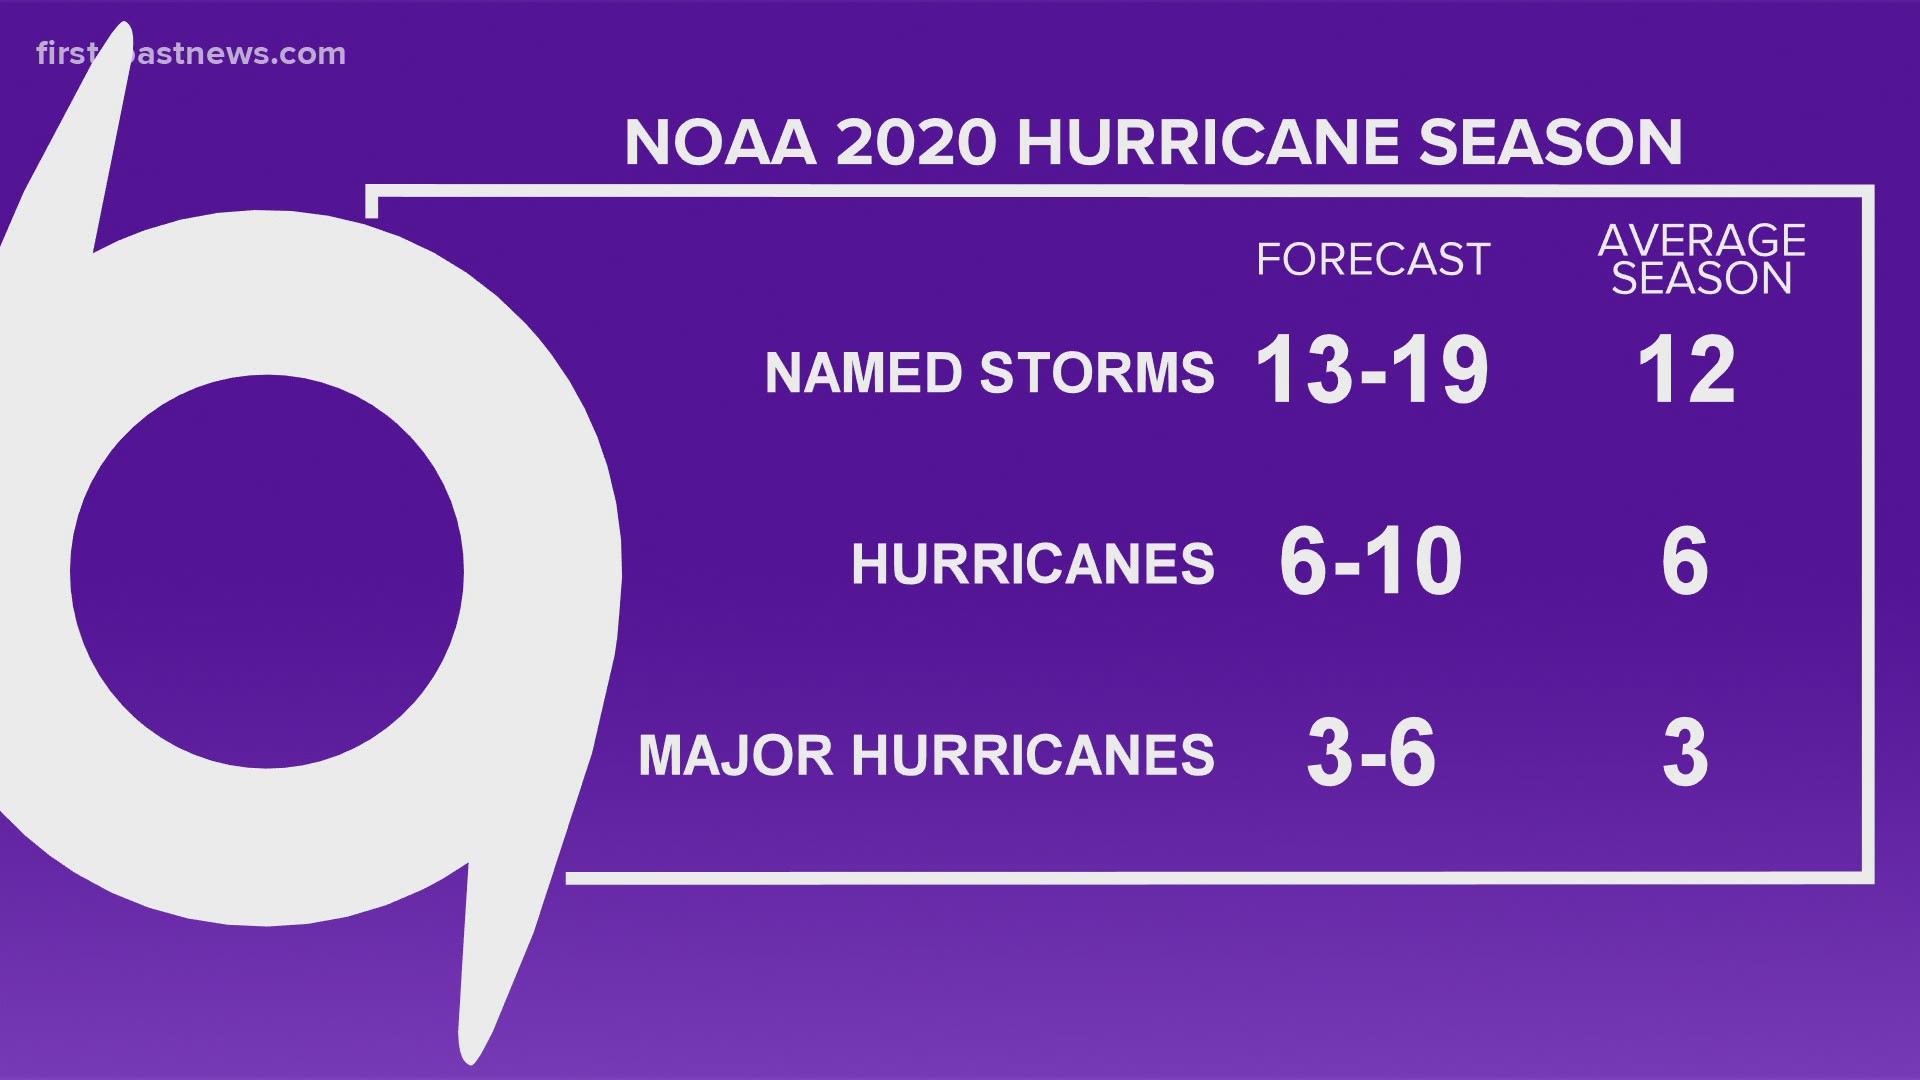 While it's too early to tell how many storms could hit land, hurricane forecasters are predicting 13 to 19 named storms.